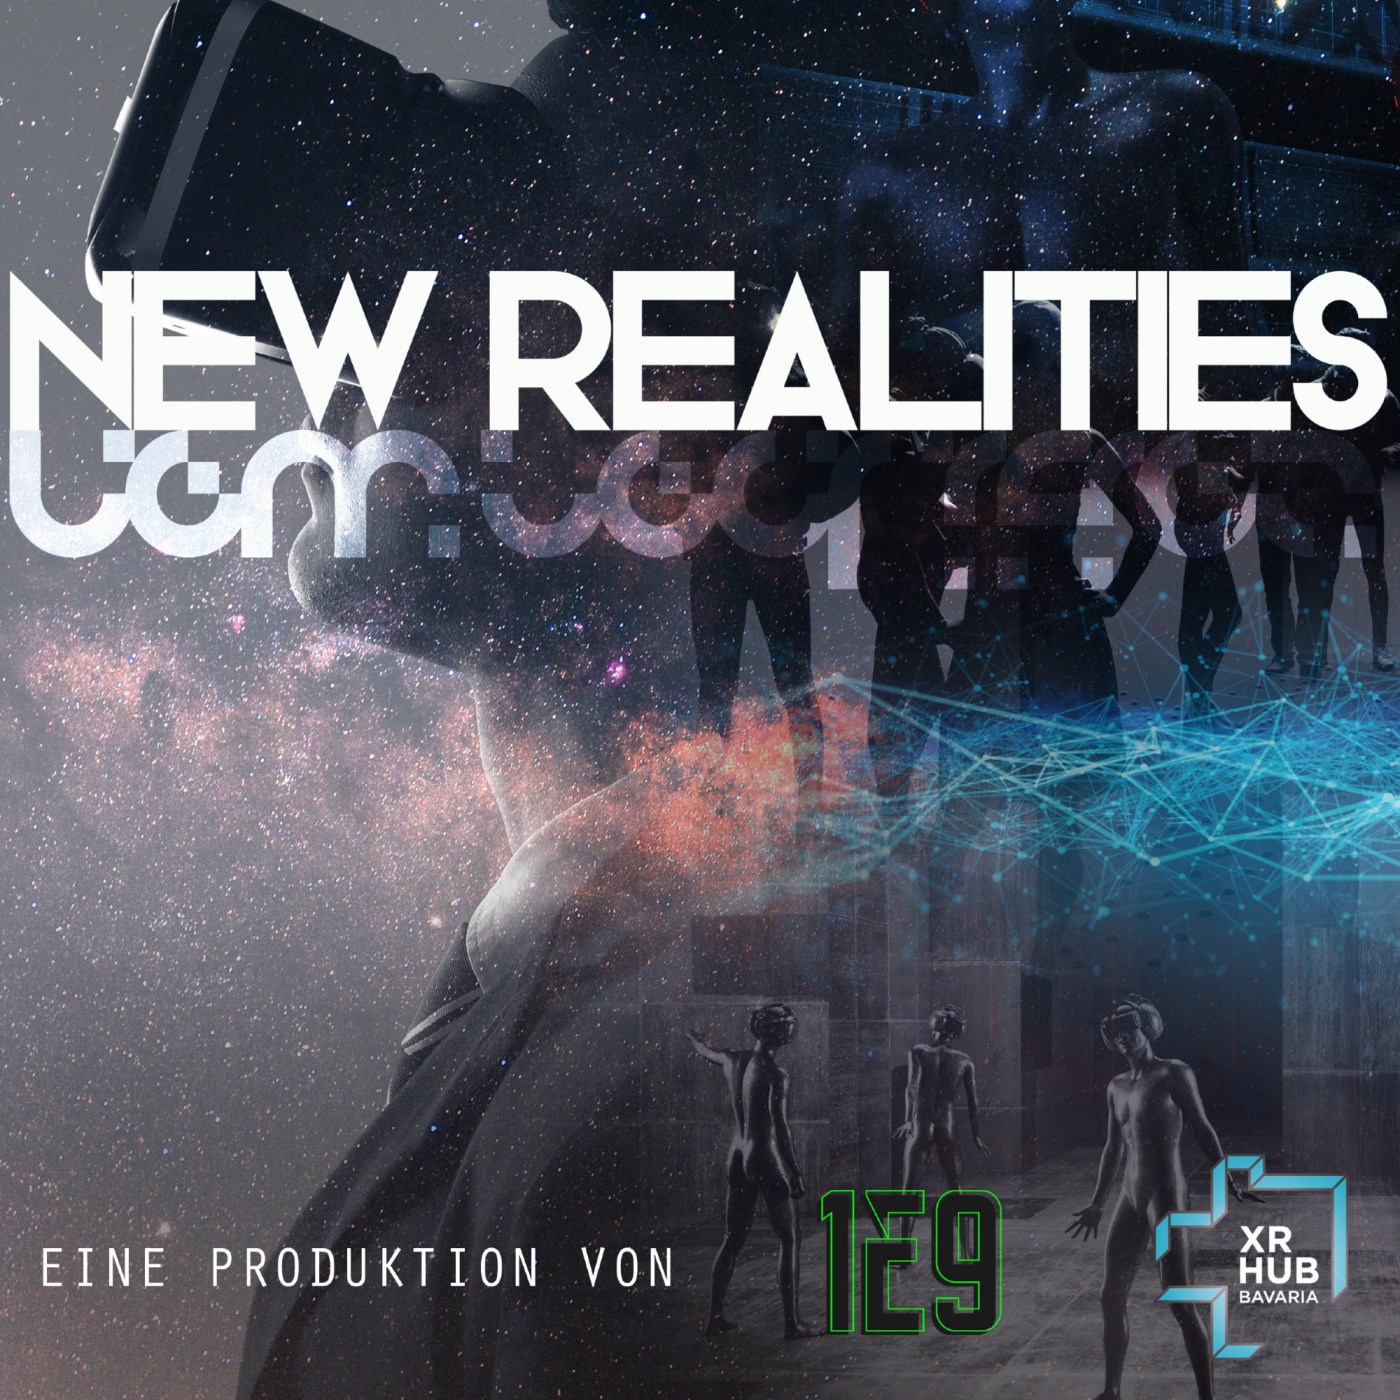 Die Neuerfindung des Theaters in Virtual Reality